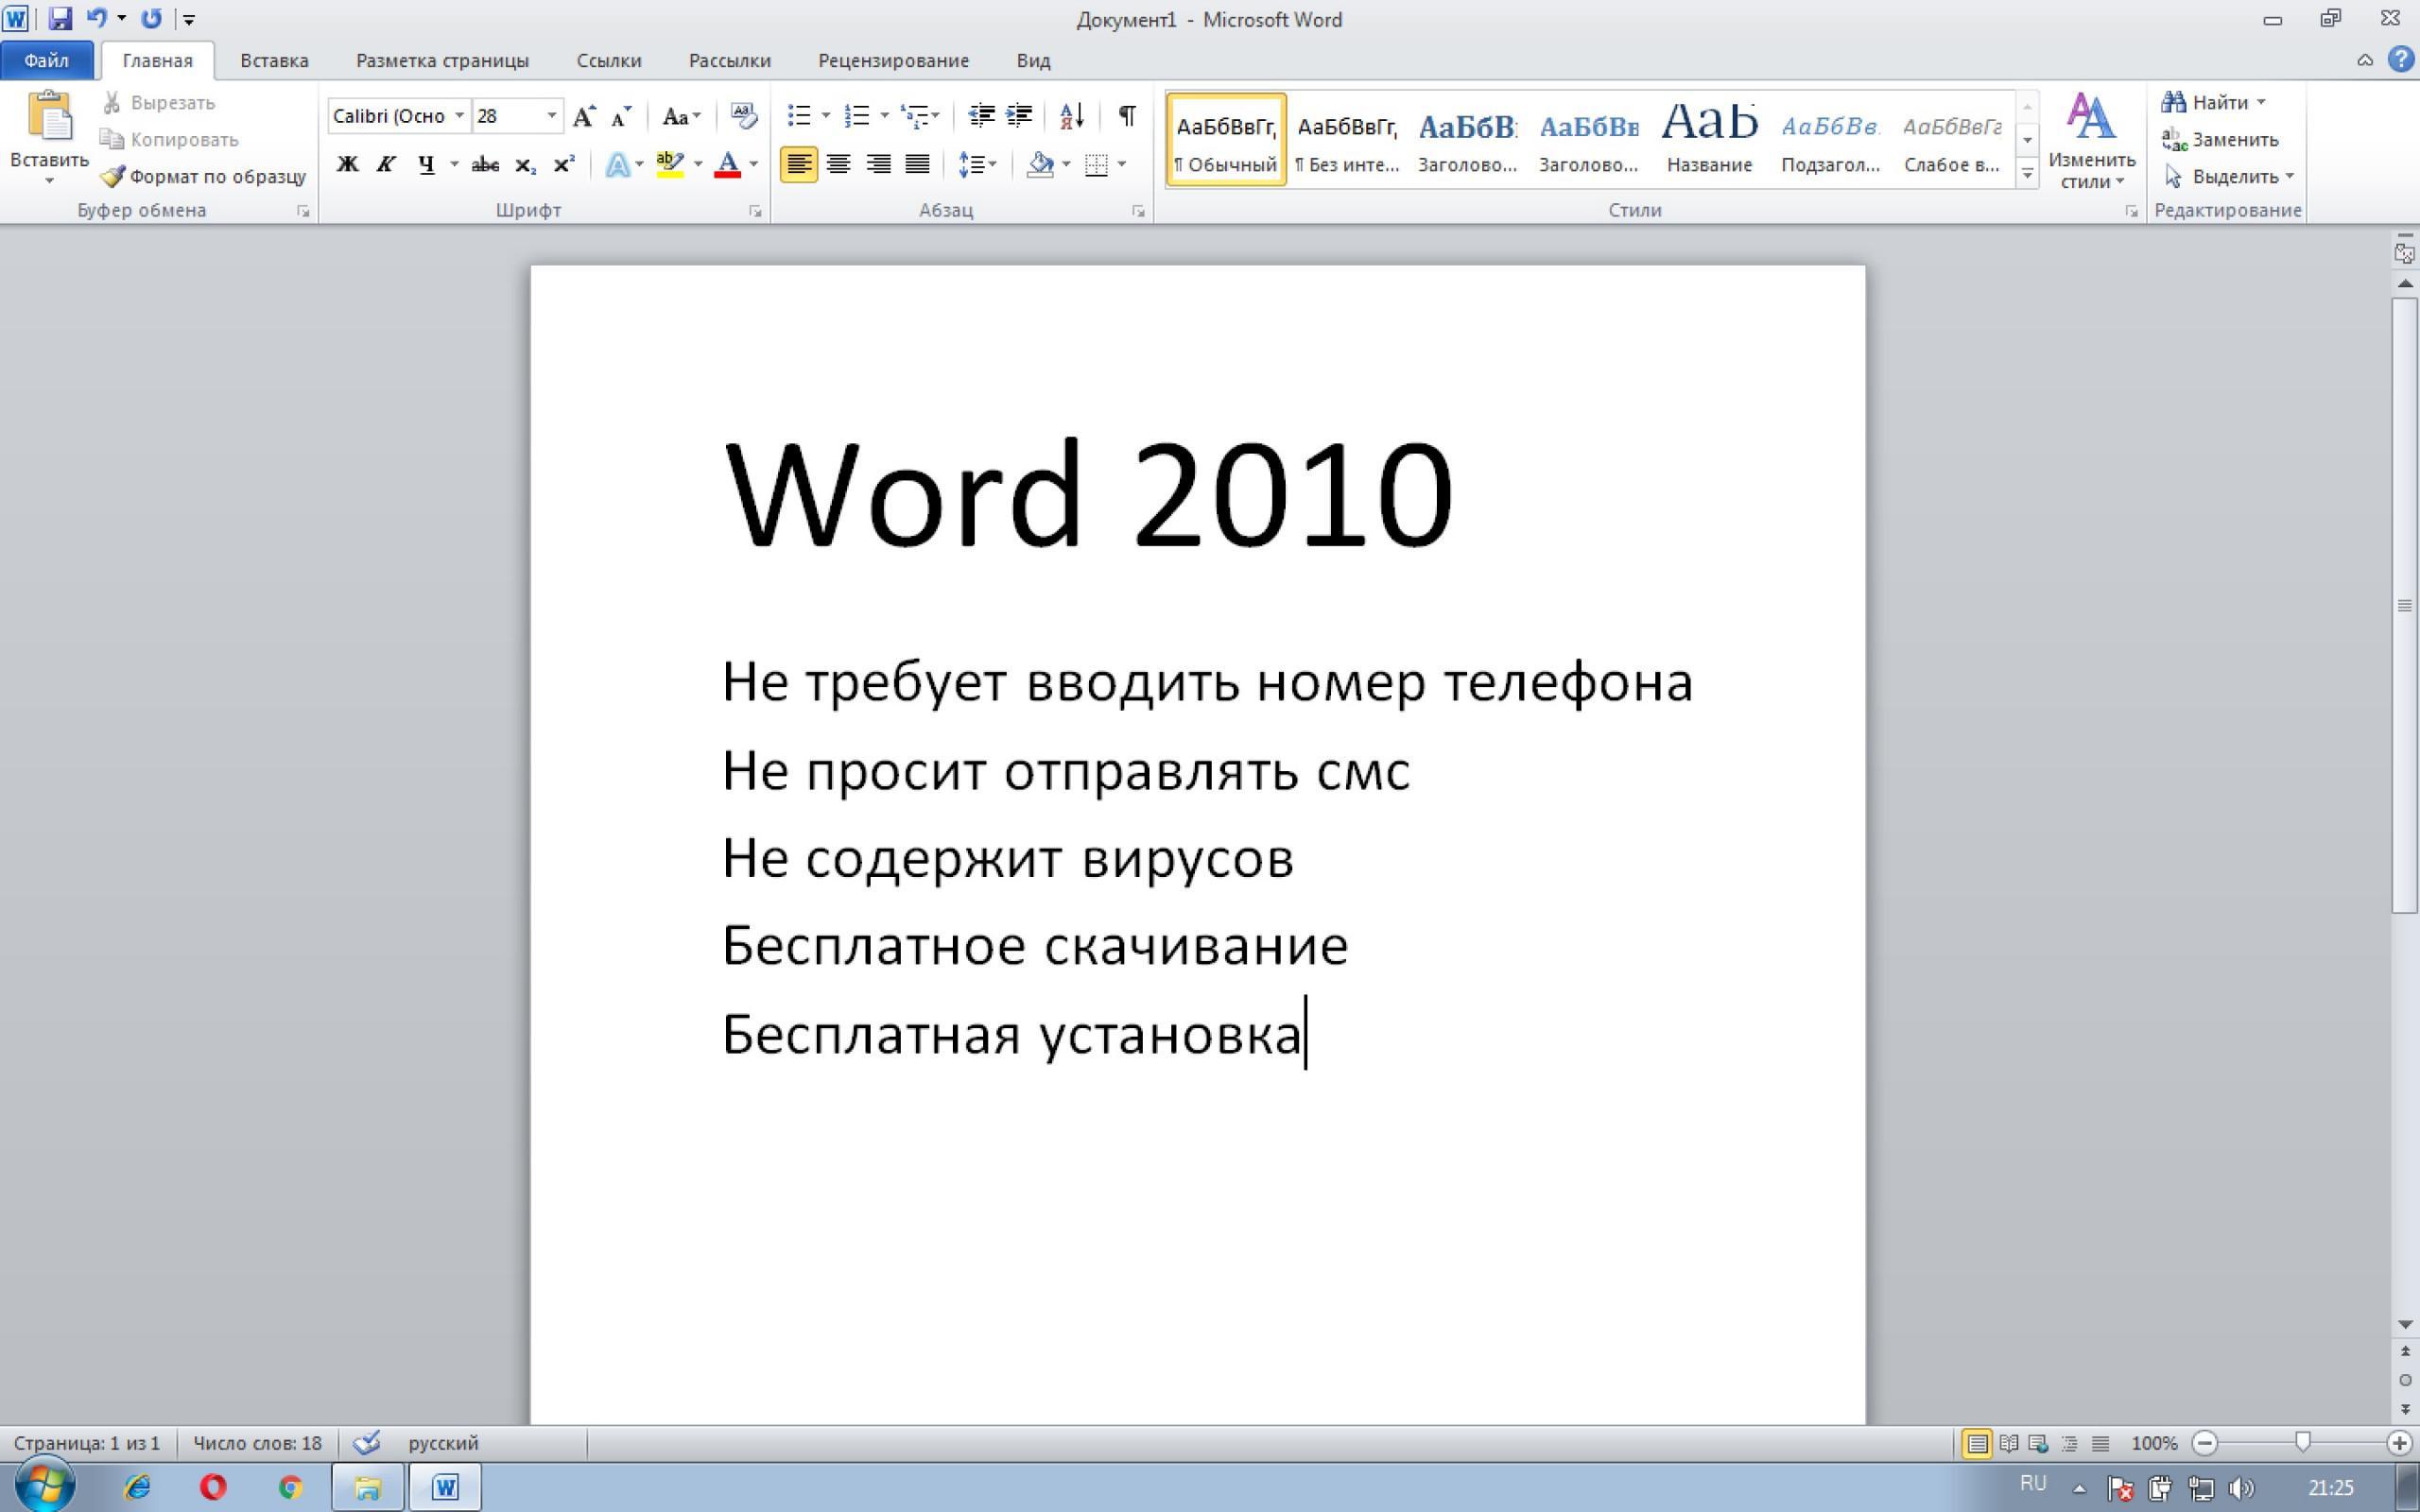 Microsoft office word 2010 free download utorrent rise of the guardians download yify torrent